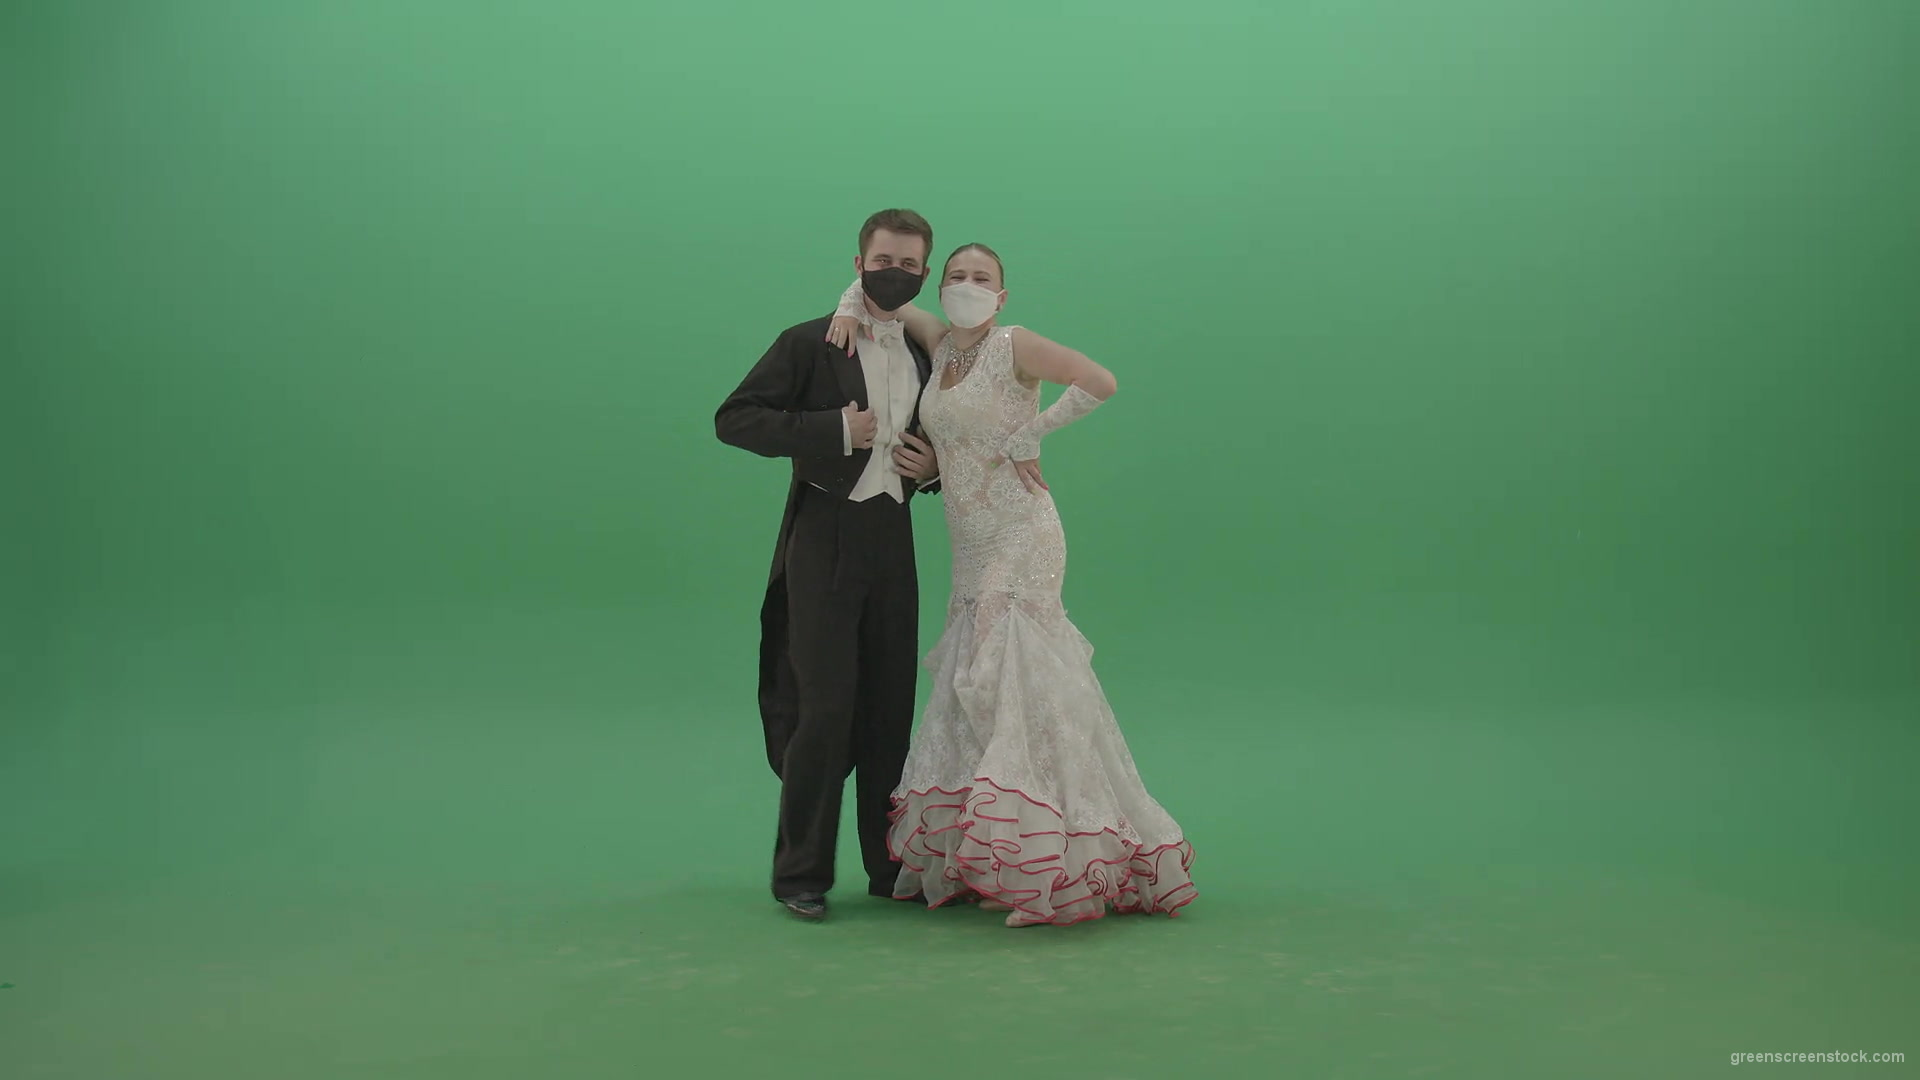 Funny-happy-balleroom-dancers-couple-chilling-and-laughing-on-green-screen-4K-Video-Footage-1920_004 Green Screen Stock